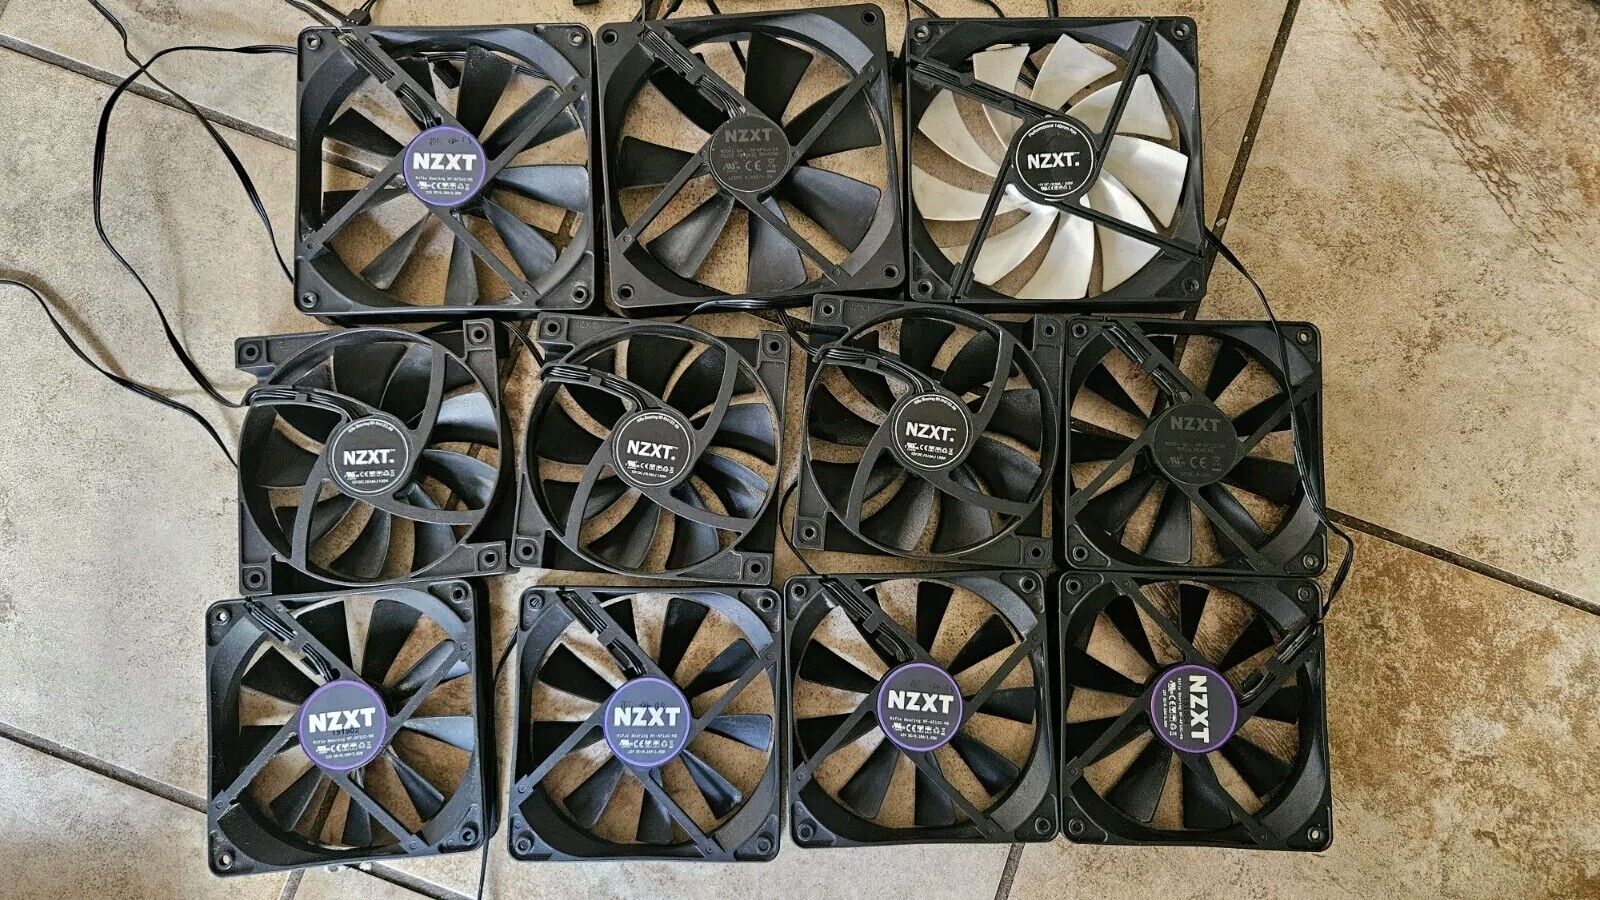 Lot of 11 NZXT 120mm 140mm Rifle Bearing High Performance Air Flow Case Fan